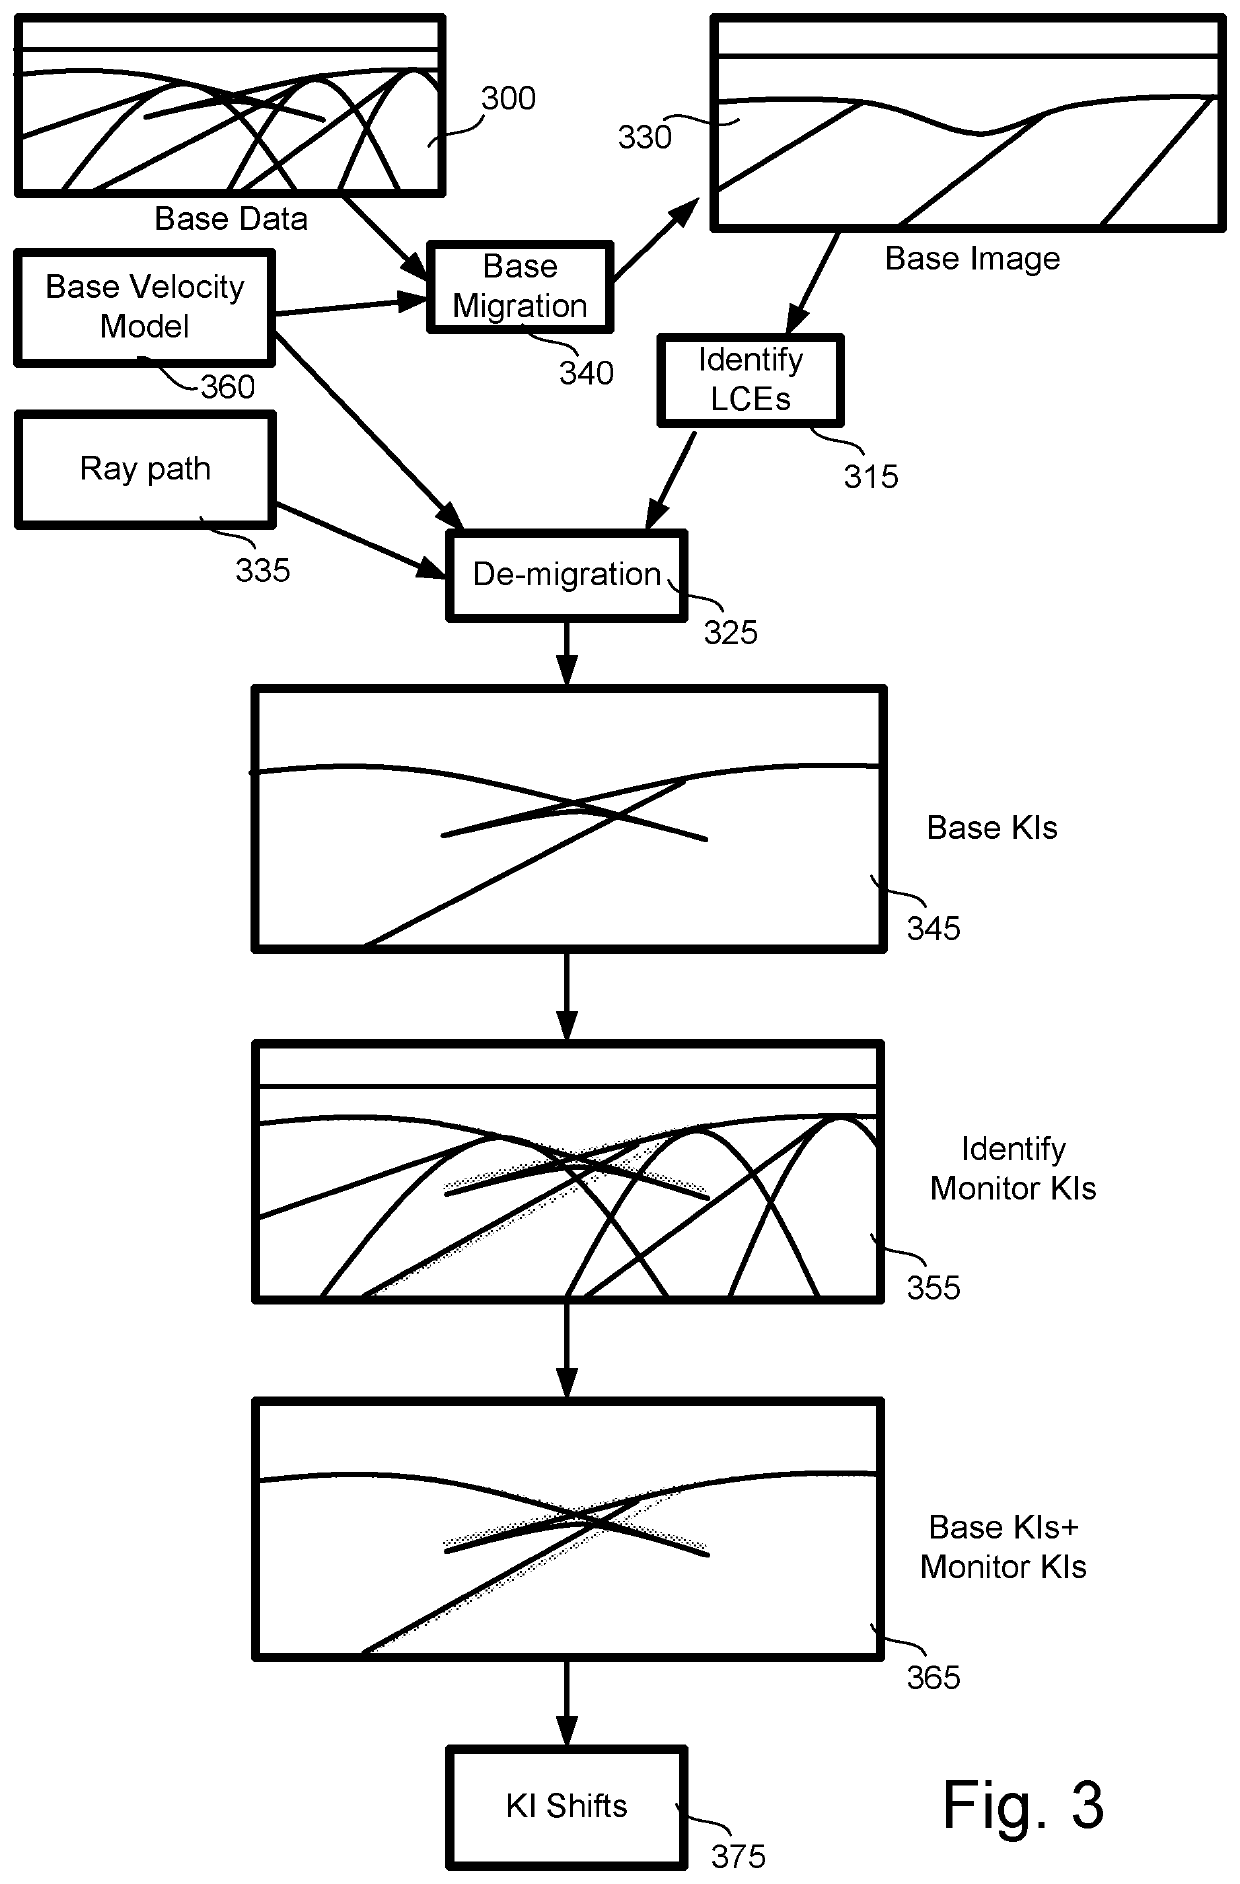 Method for obtaining estimates of a model parameter so as to characterise the evolution of a subsurface volume over a time period using time-lapse seismic